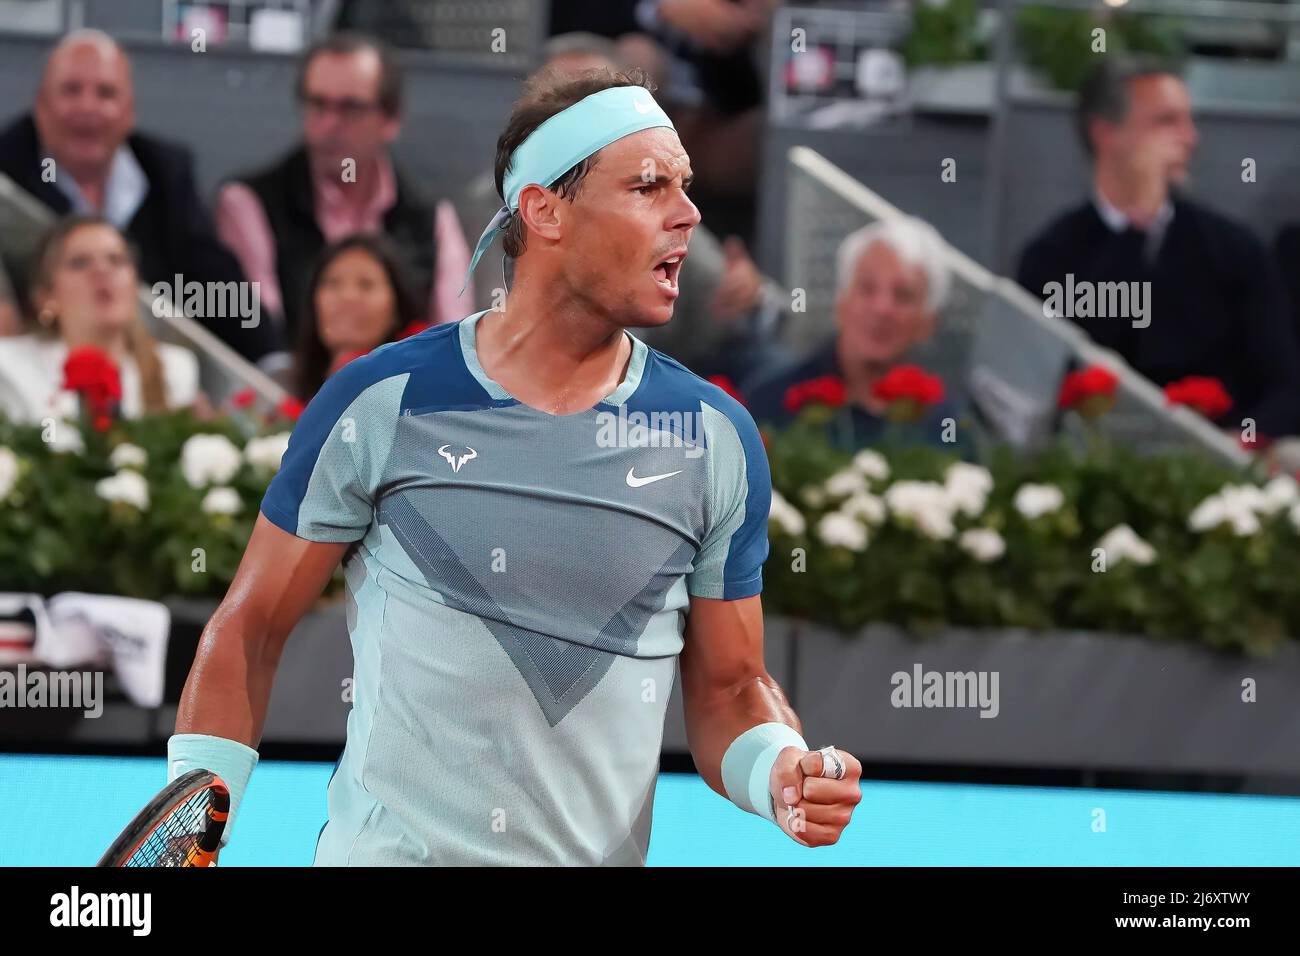 Rafael Nadal of Spain celebrates victory after their second round match against Miomir Kecmanovic of Serbia on day seven of Mutua Madrid Open at La Caja Magica in Madrid.Rafael Nadal beats Miomir